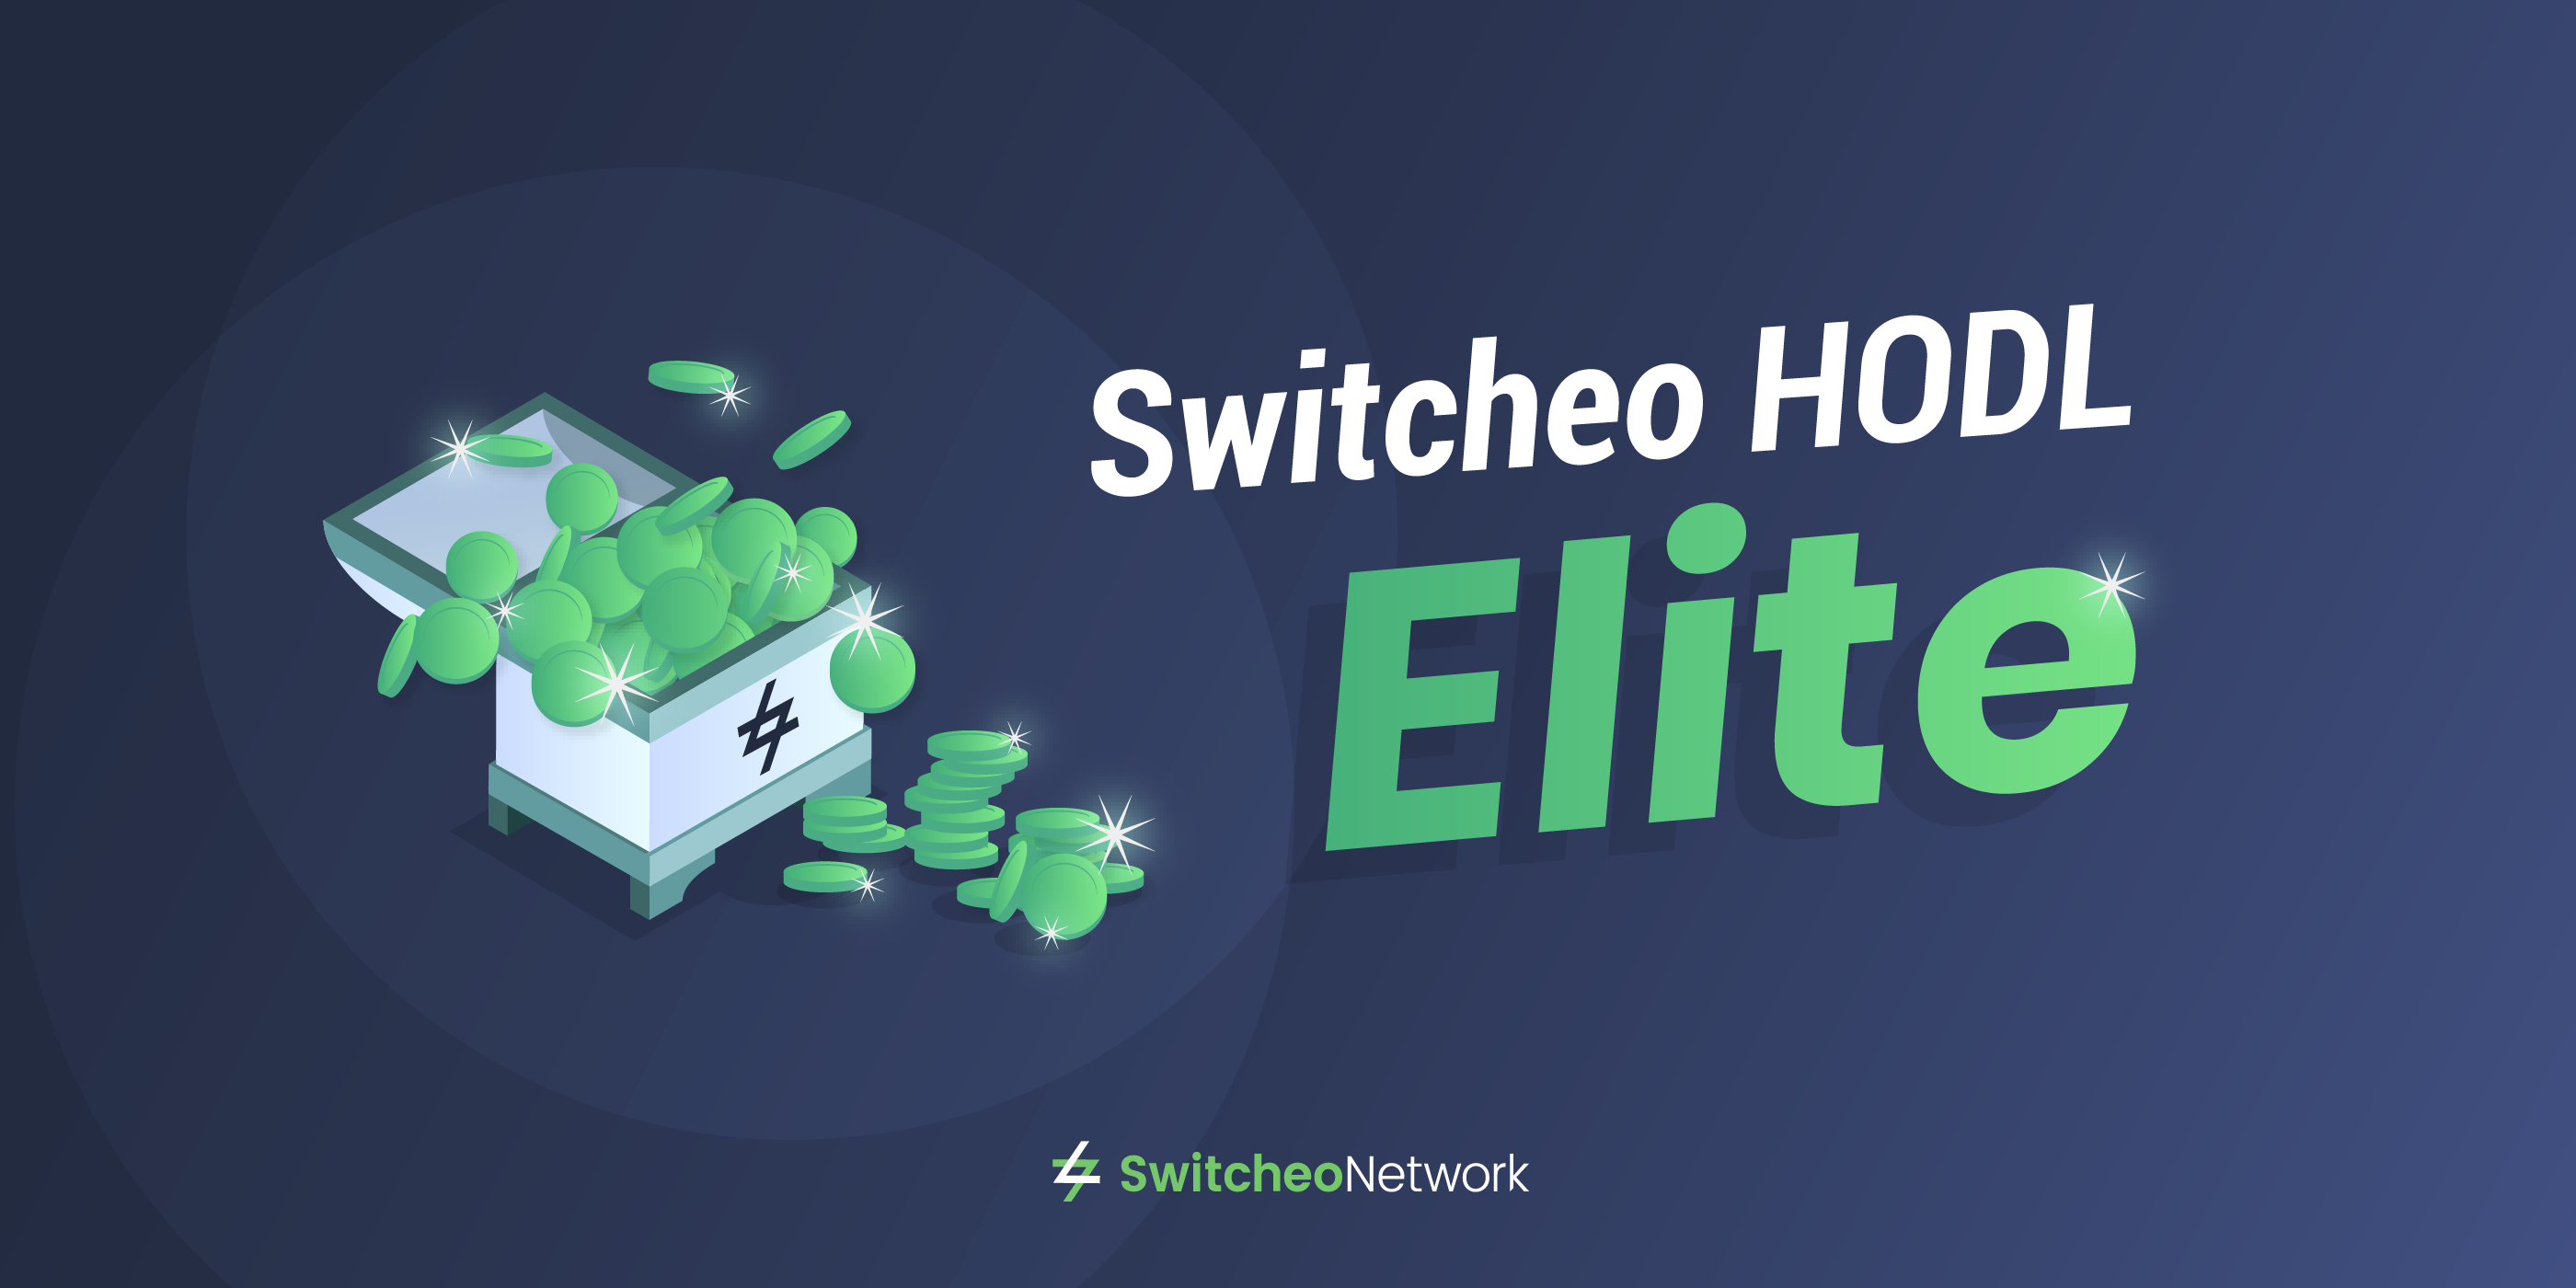 The Switcheo Chest event is back for 2020, bigger and better than ever!